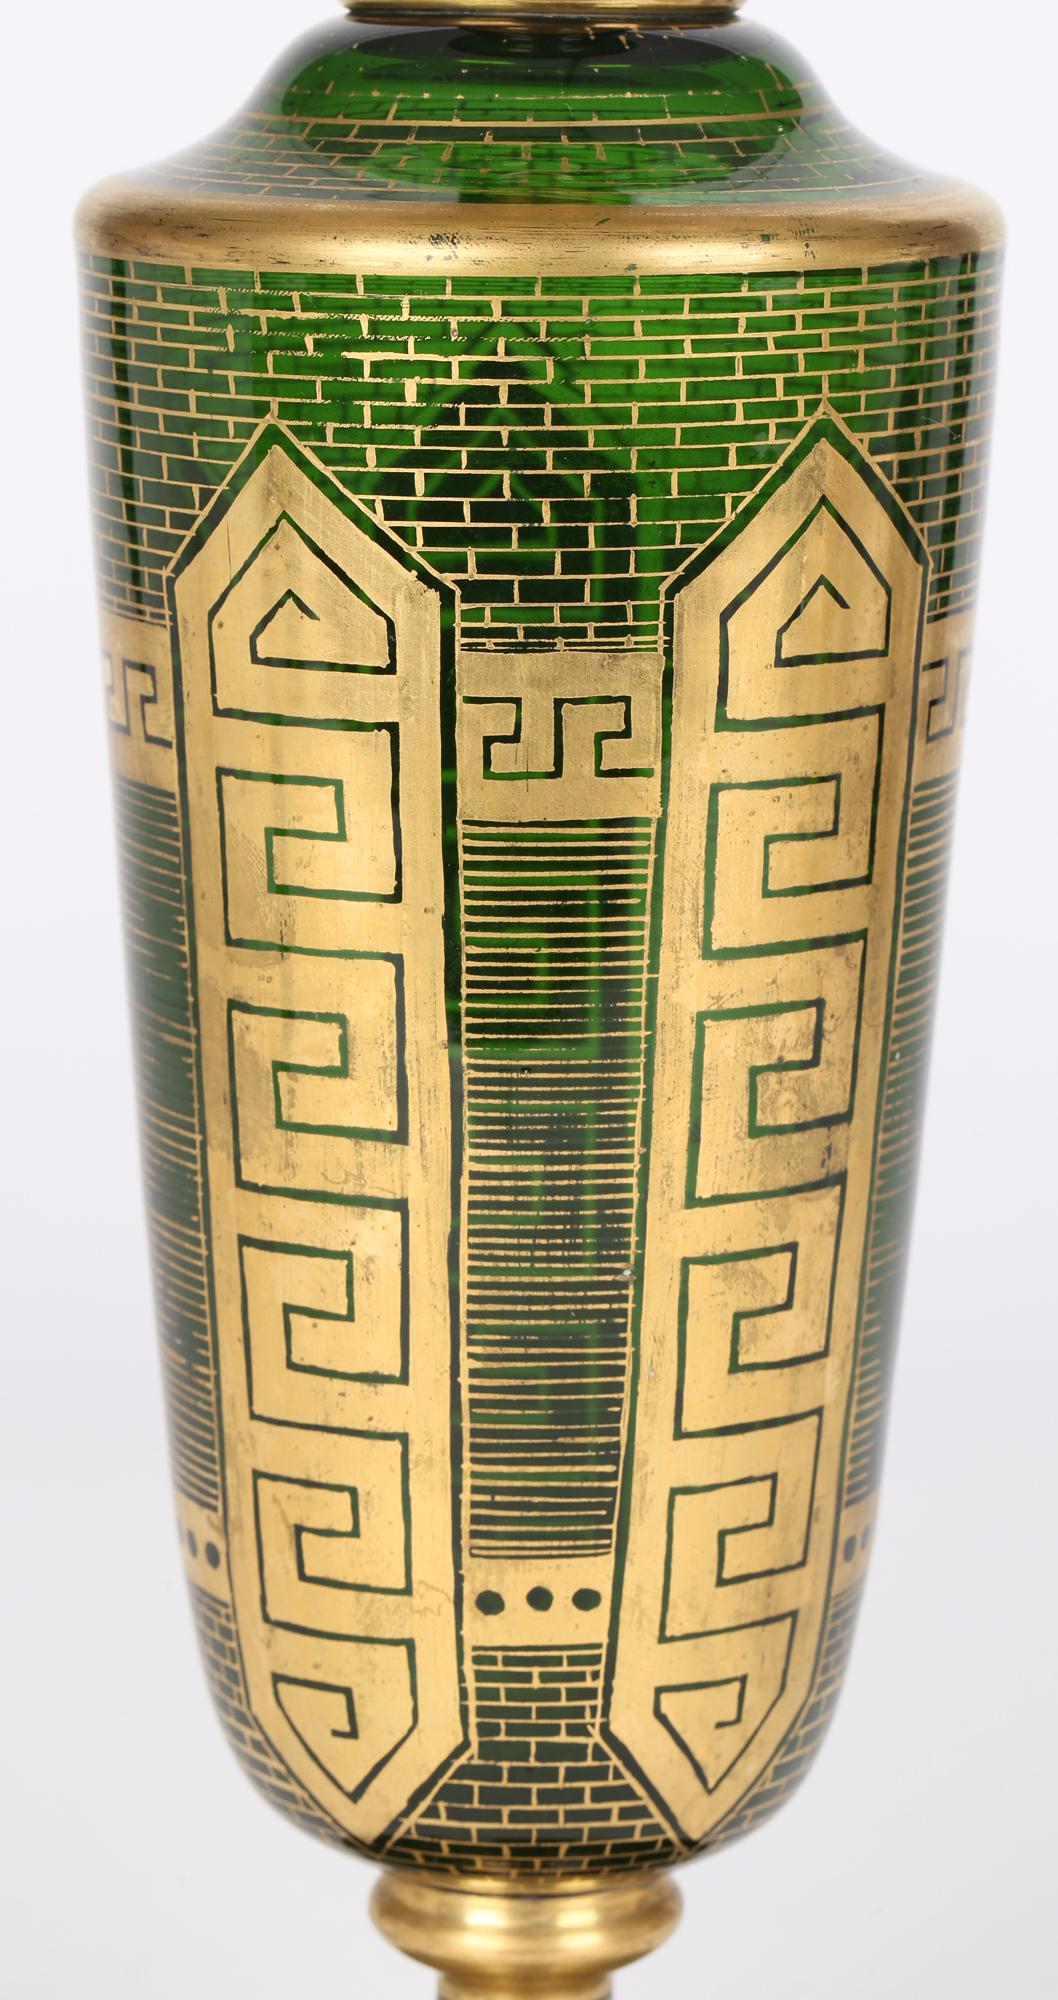 A very fine and tall antique Bohemian green glass vase decorated with gilding, attributed to Moser and dating from the latter 19th century. This elegant and impressive vase stands on a rounded pedestal base with knop stem supporting a tall round